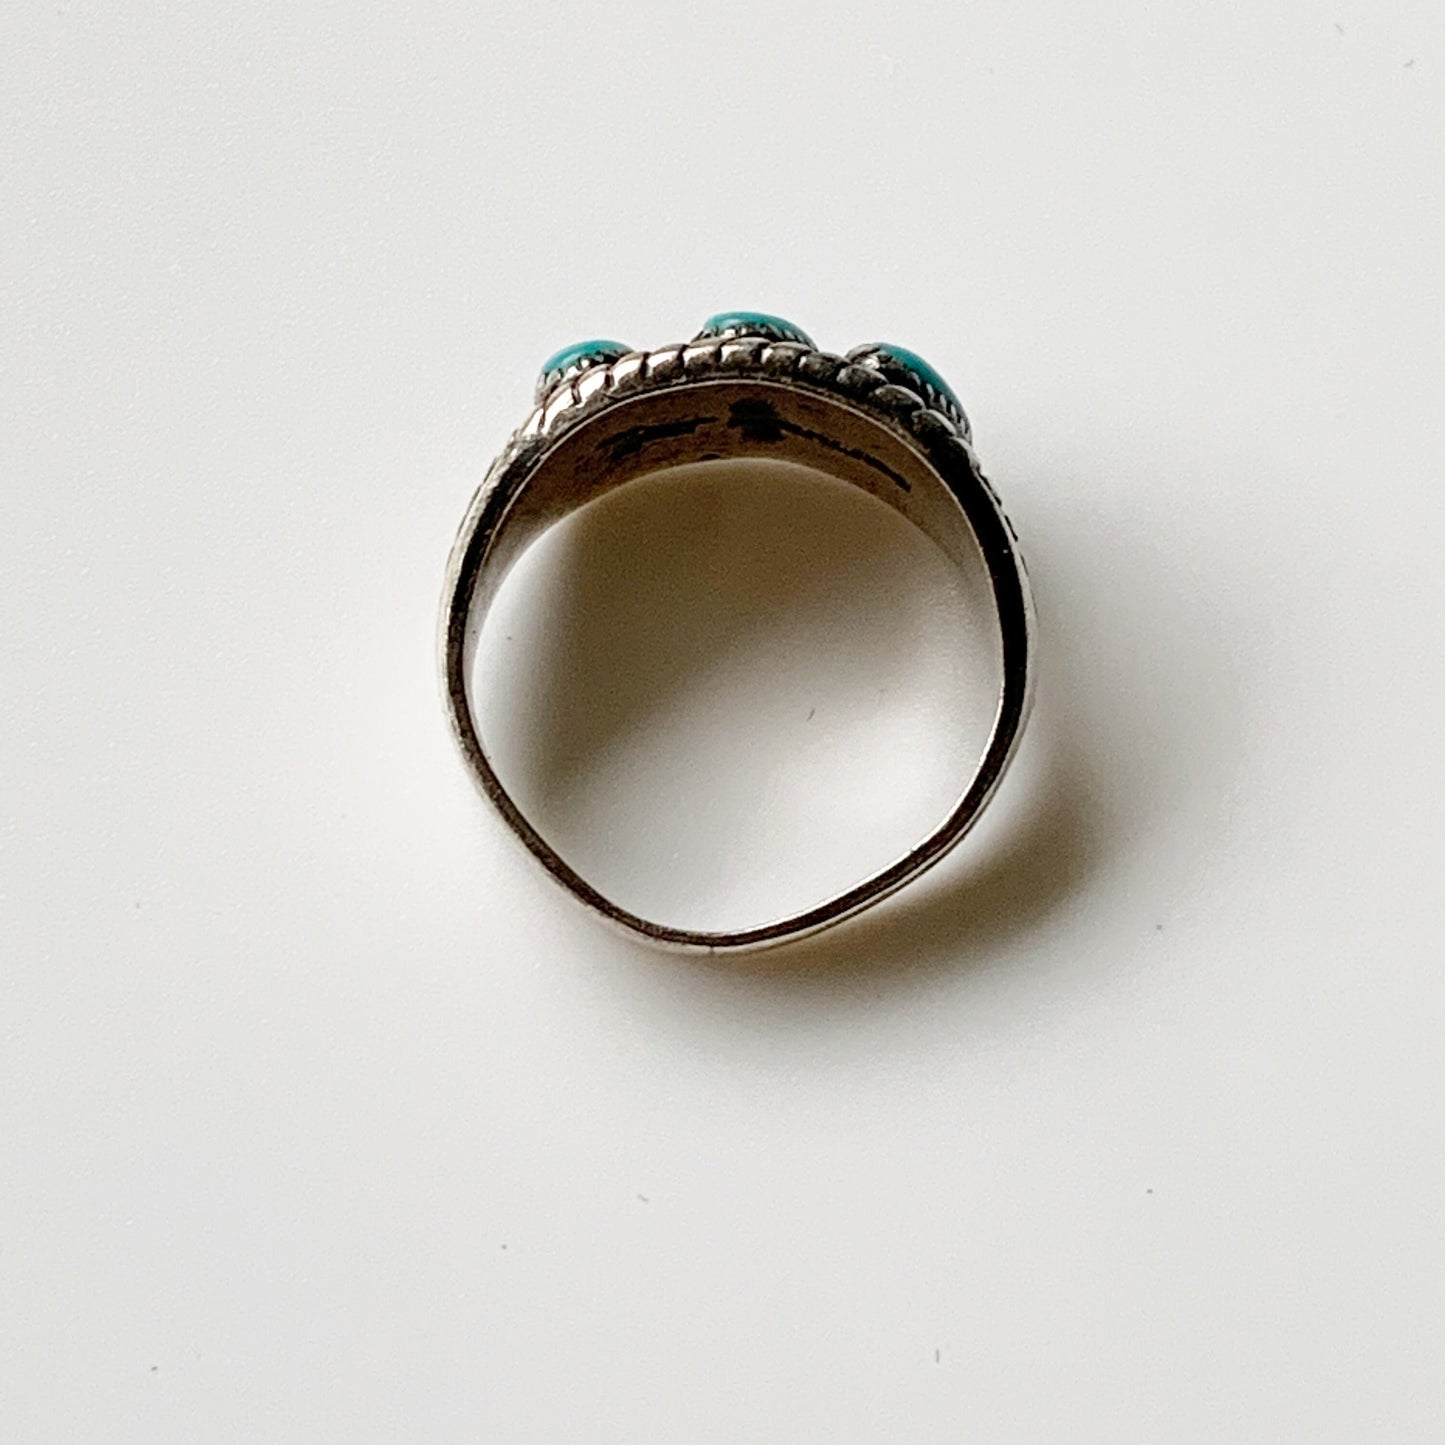 Vintage Turquoise Three Stone Ring | Bell Trading Post Ring | Size 6